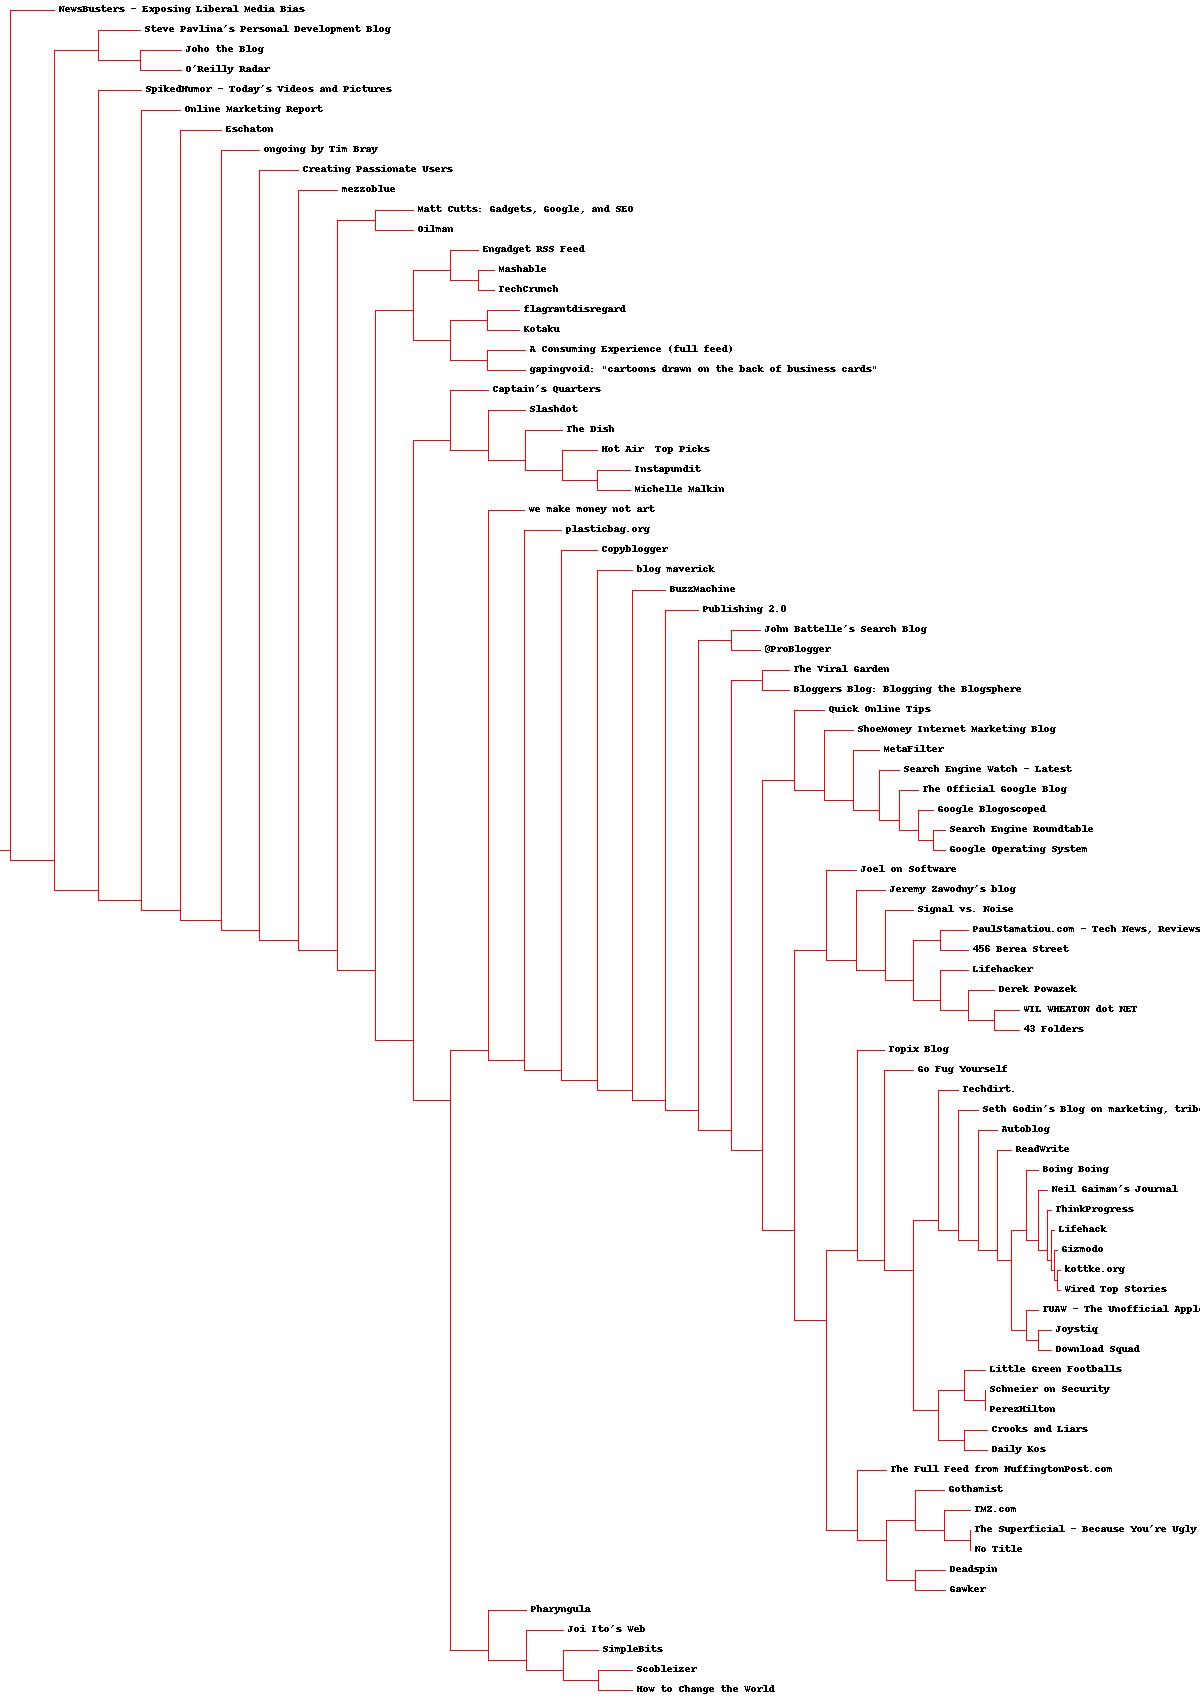 Dendrogram of Blog Clustering by Word Use